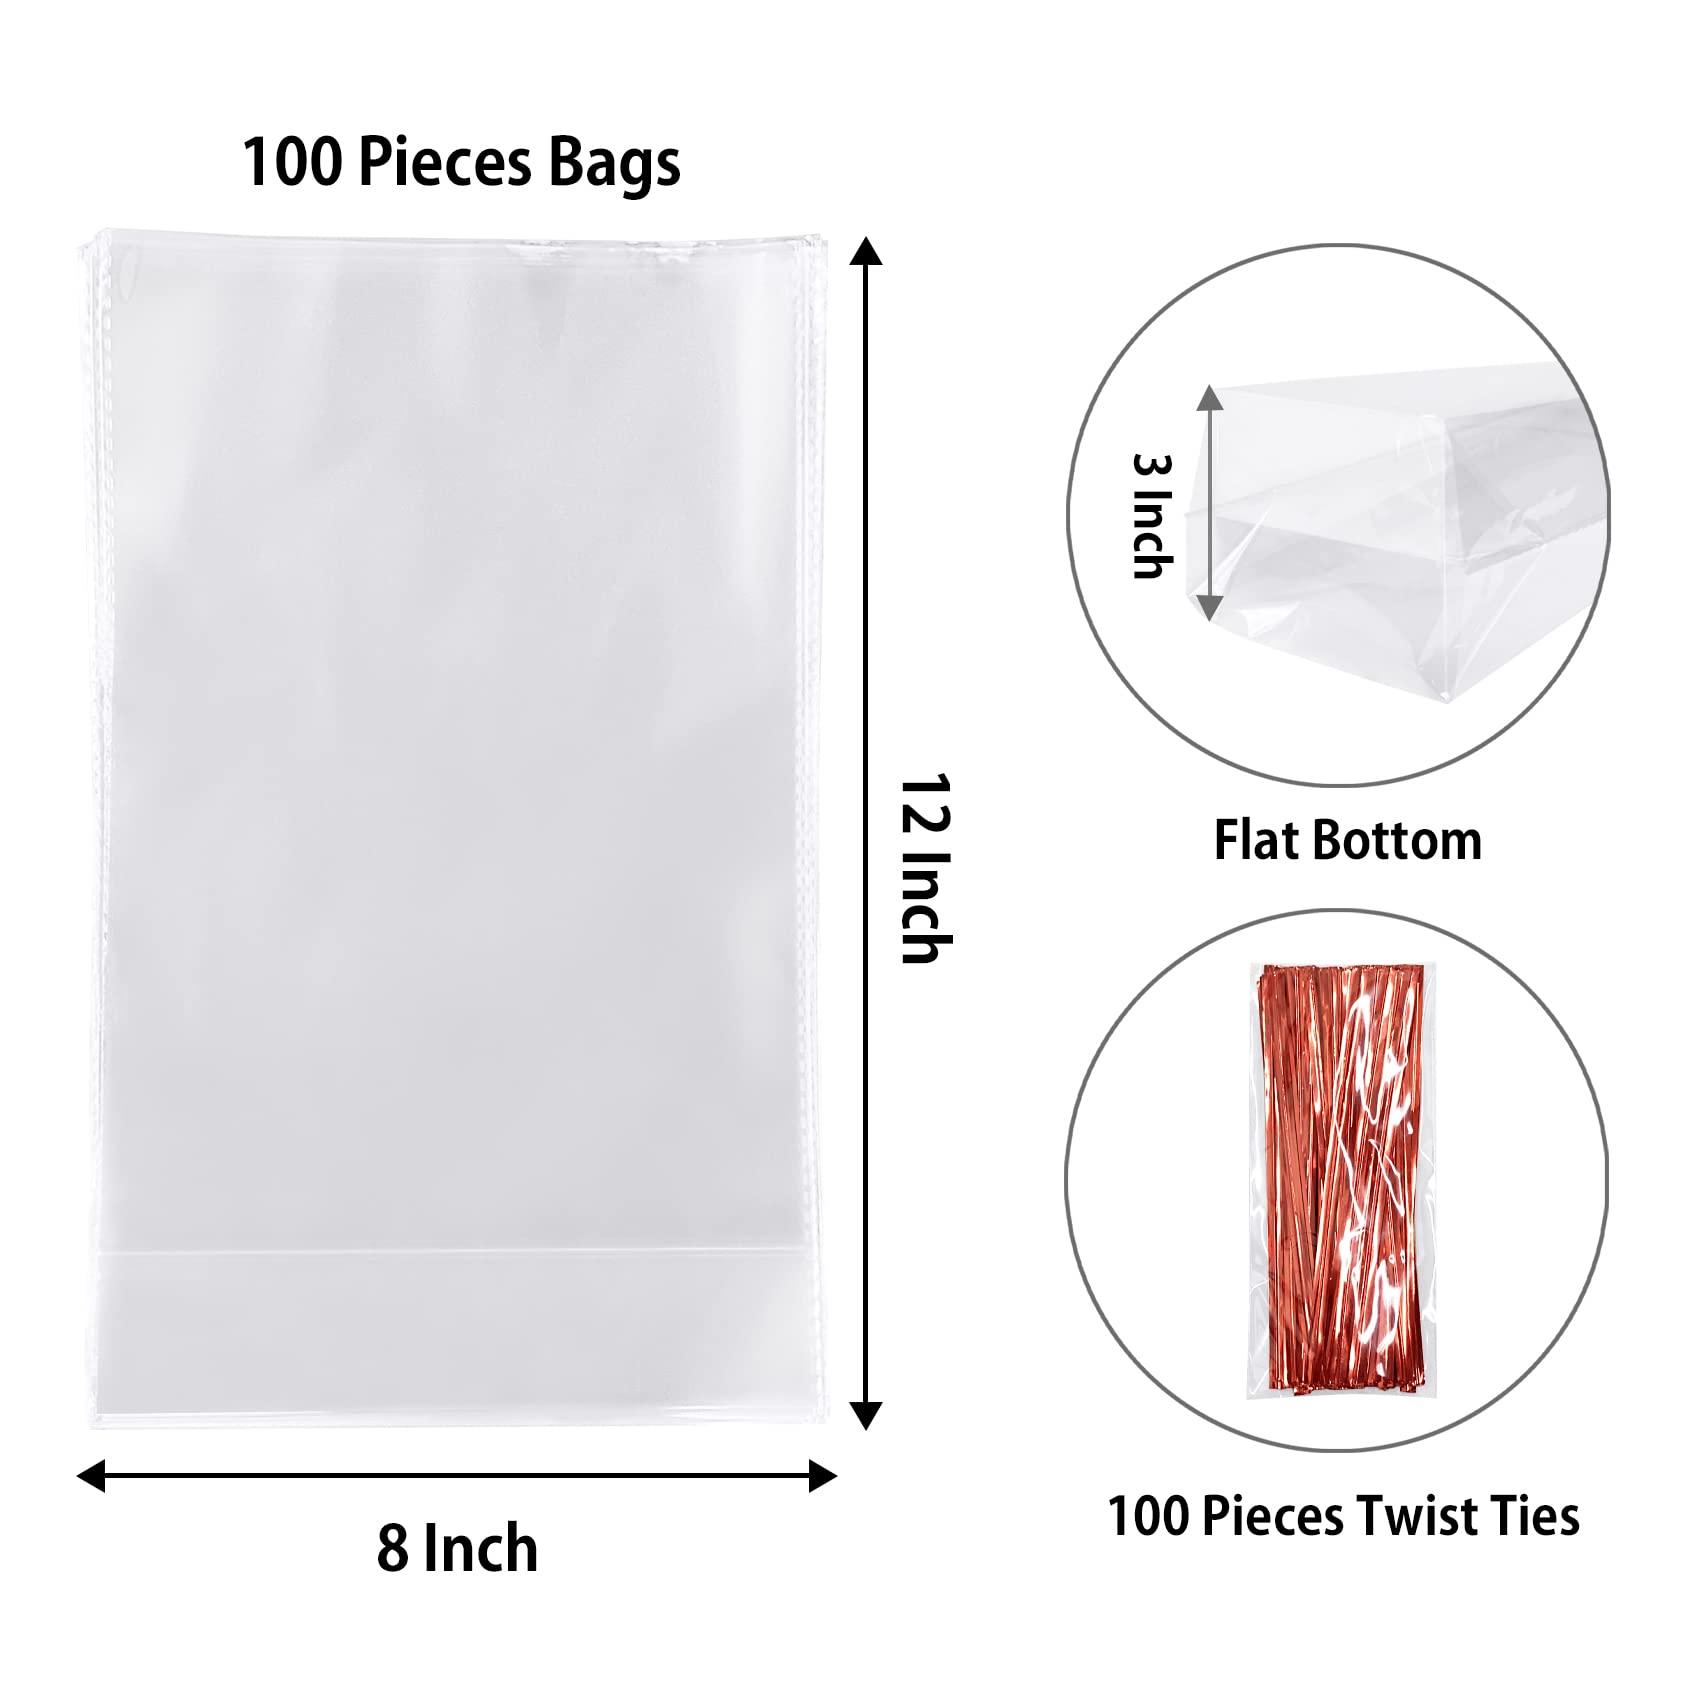 Morepack Flat Bottom Cellophane Bags,100Pcs 8x3x12 Inches Clear Flat Bottom Cellophane Treat Gift Bags with Twist Ties, Cello Bags for Cookie, Candy - CookCave